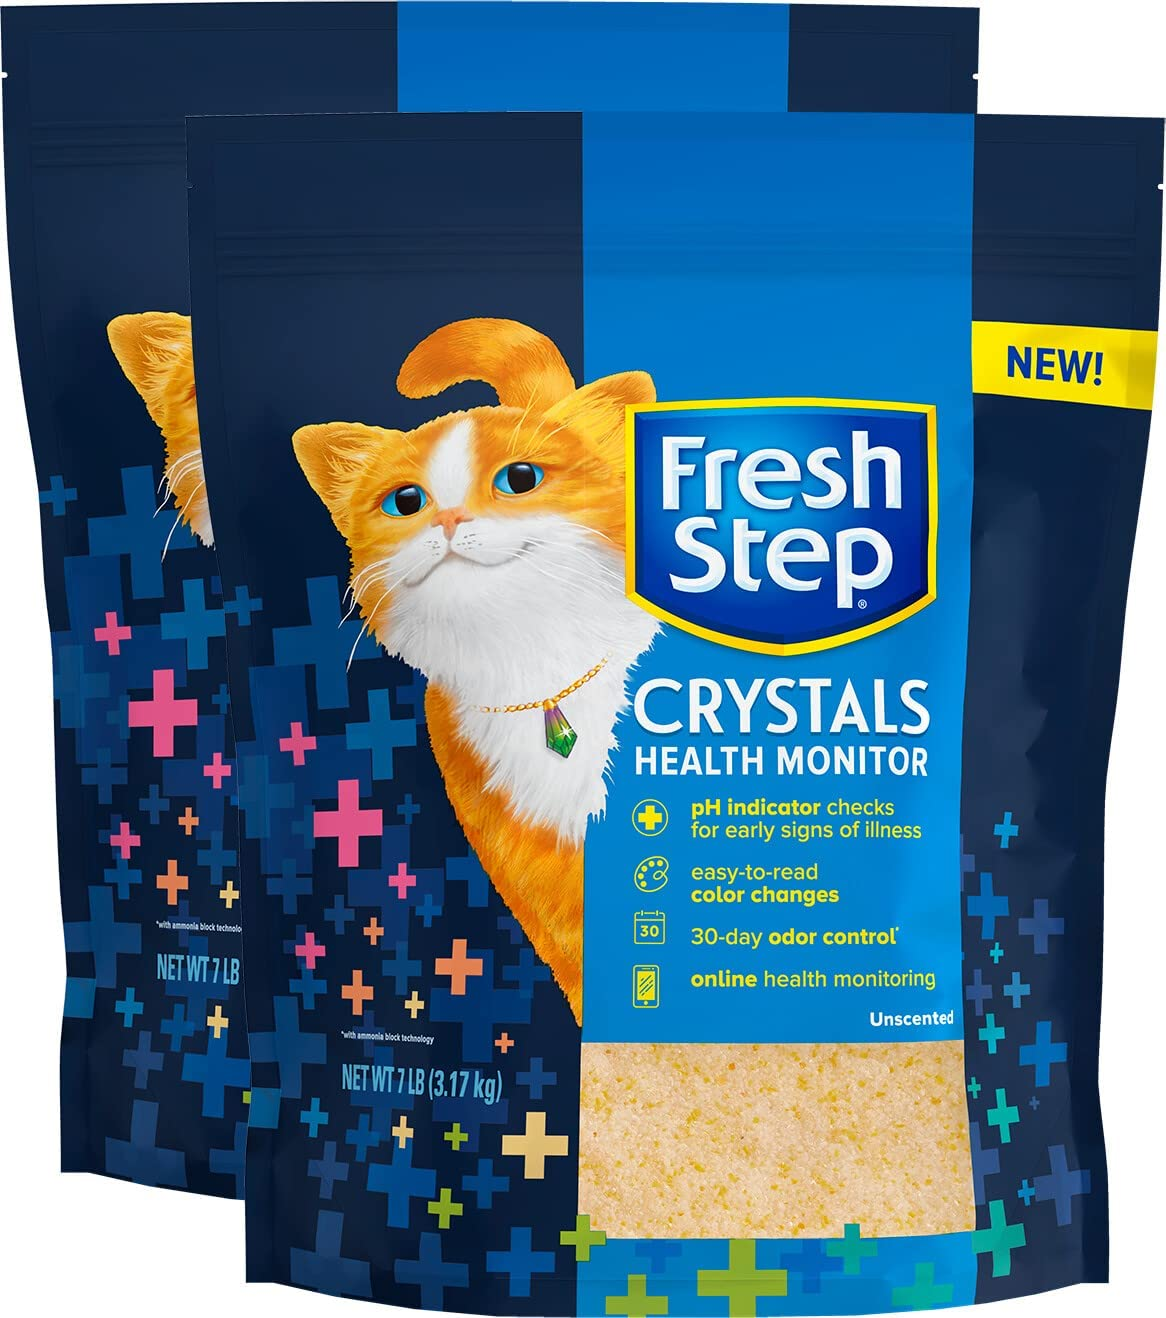 14-Lb Fresh Step Crystals Health Monitoring Cat Litter - Unscented (Checks Urine pH Levels to Monitor Cat Health) $20.78